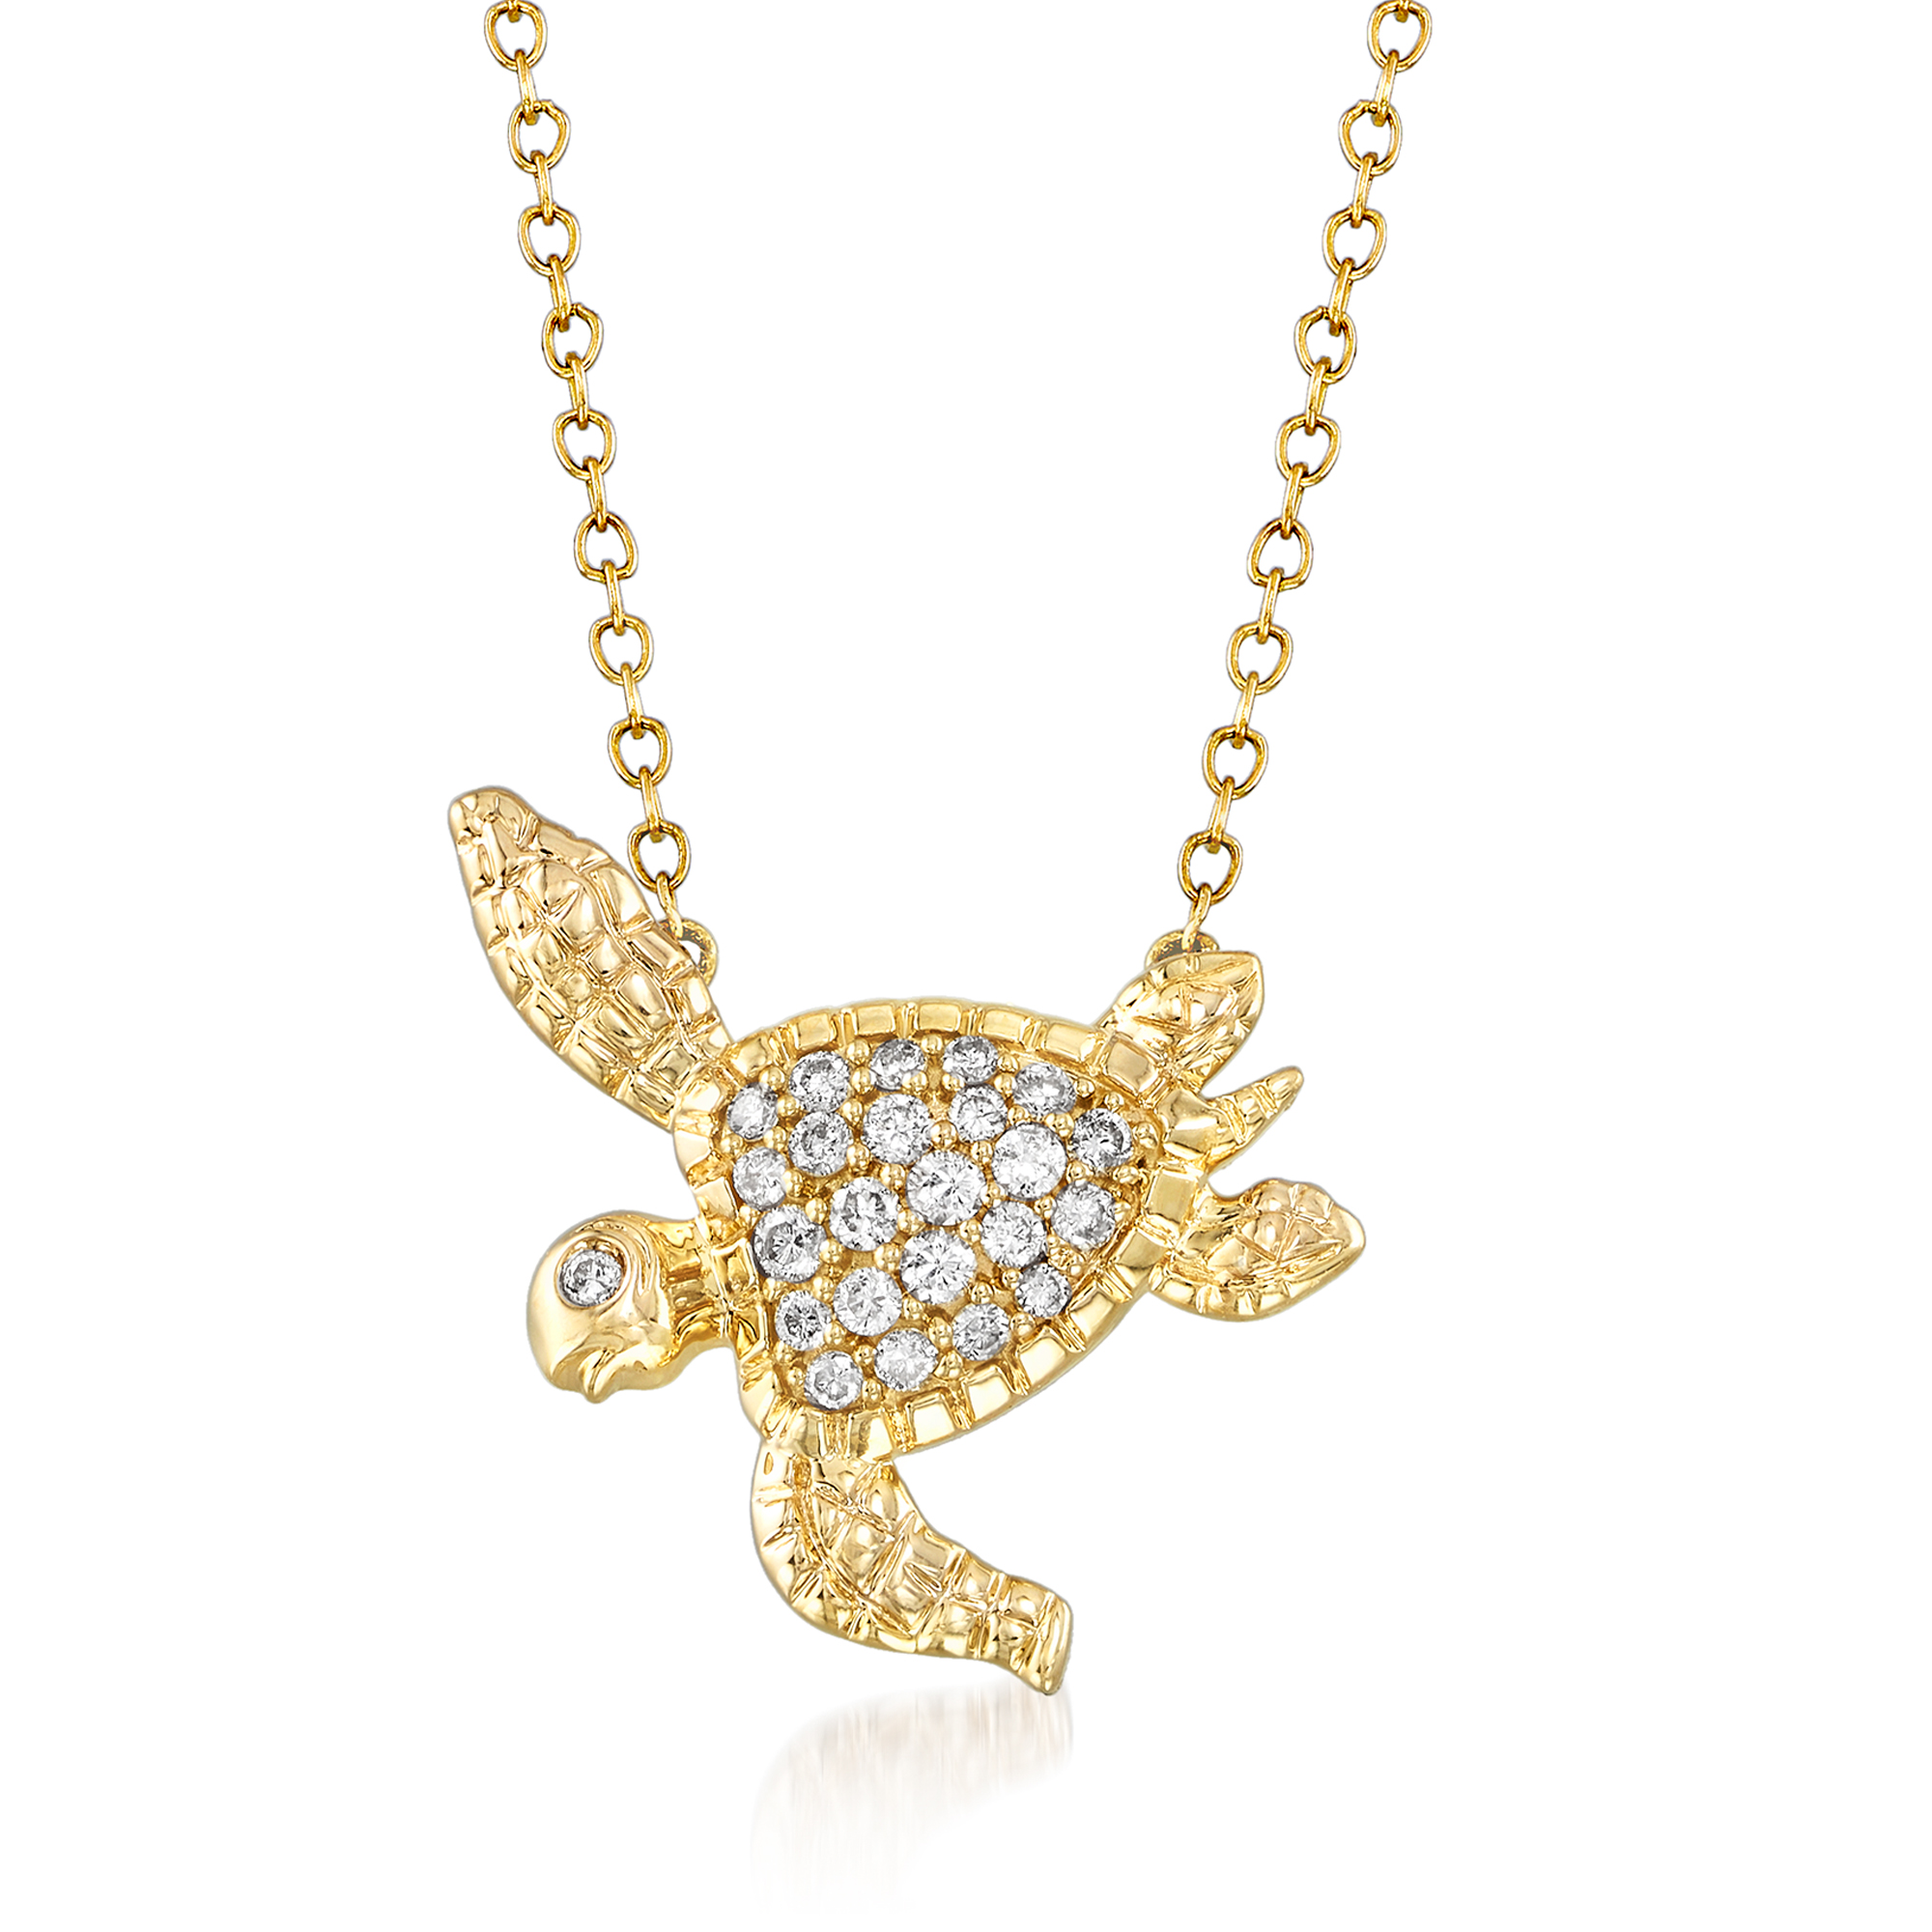 25 ct. t.w. Diamond Turtle Necklace in 14kt Yellow Gold. 16 